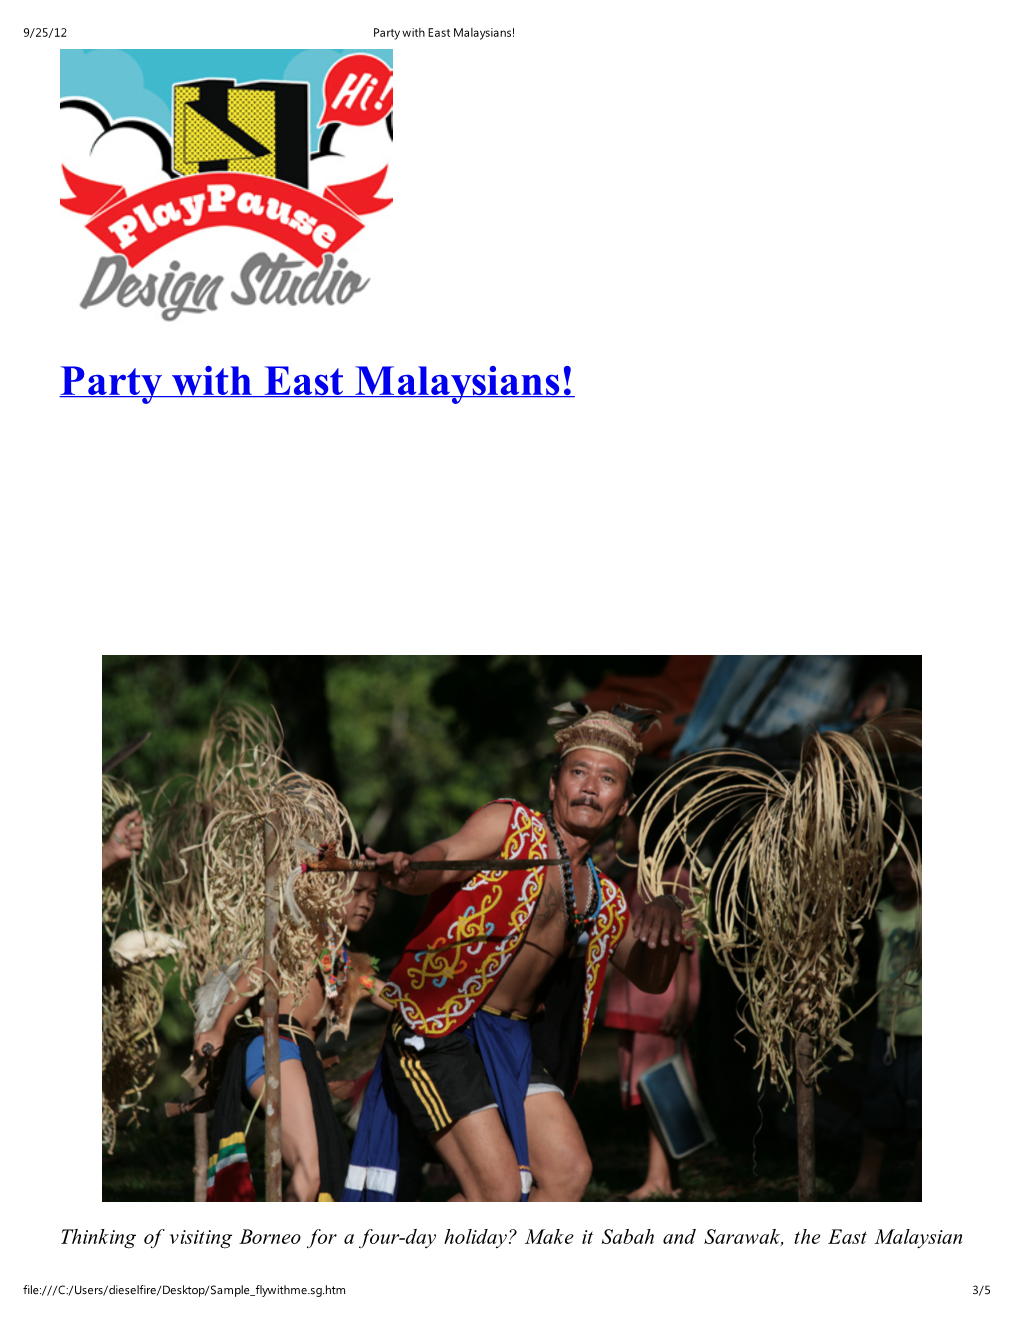 Party with East Malaysians!